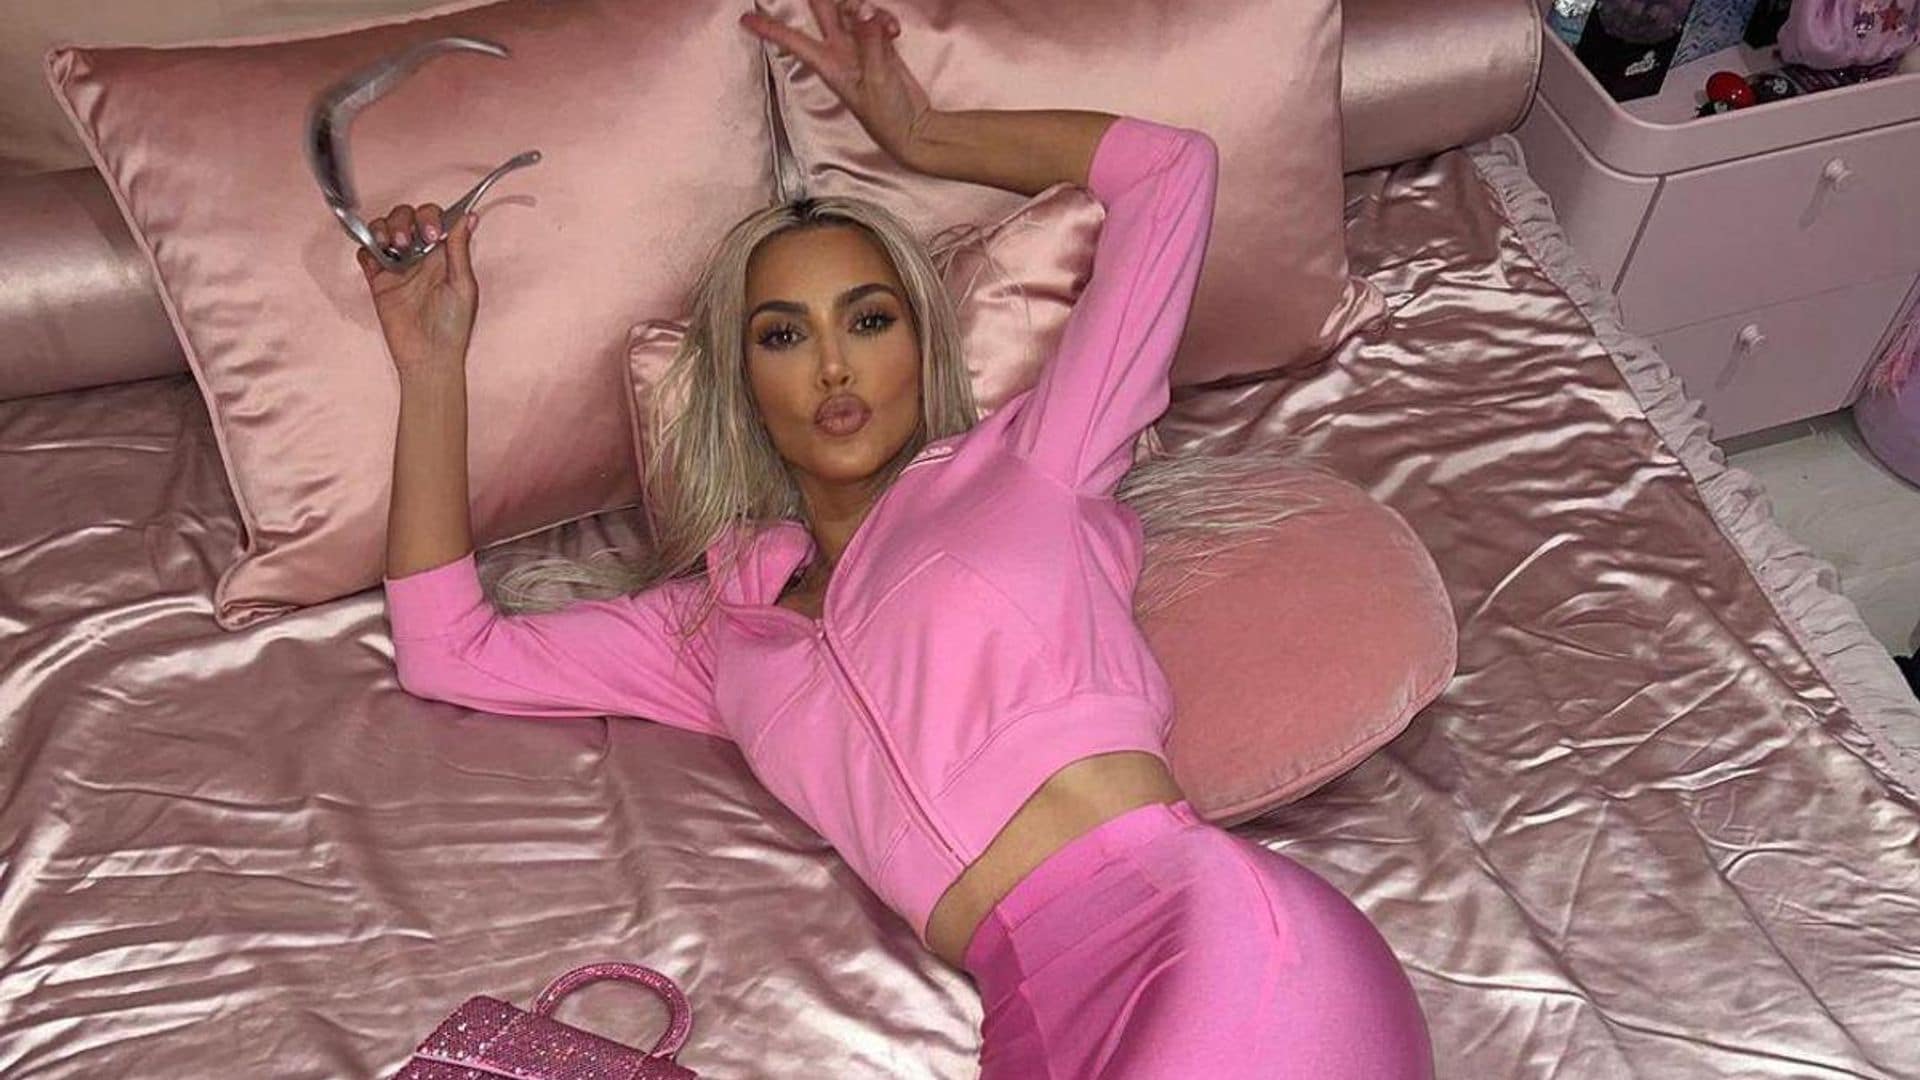 Kim Kardashian wears all-pink in new photos by daughter North West